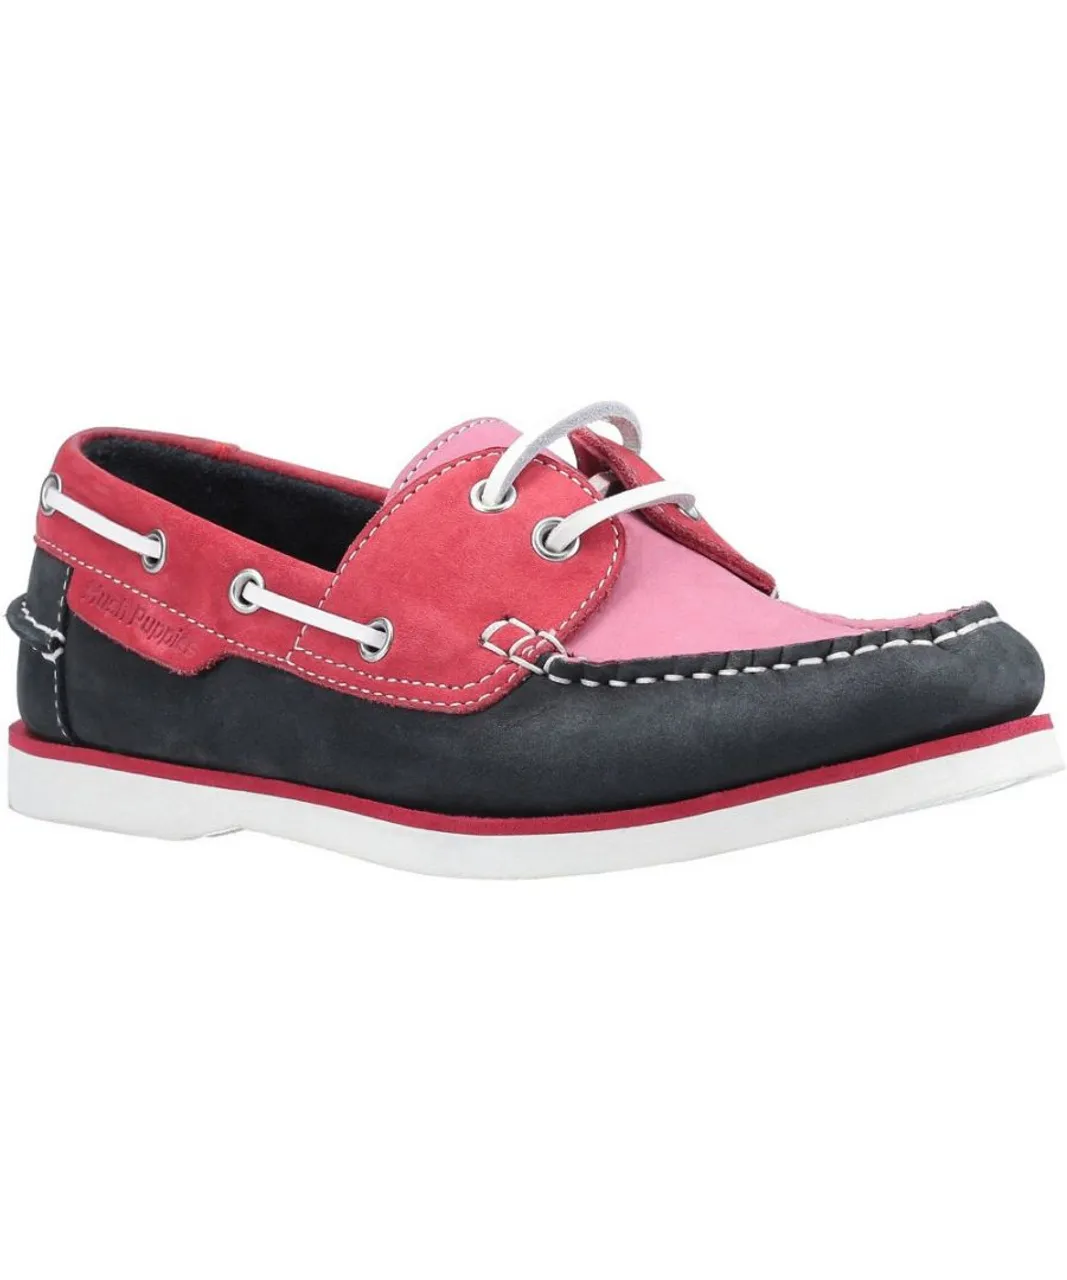 Hush Puppies Womens Hattie Leather Lace Up Boat Shoes - Pink